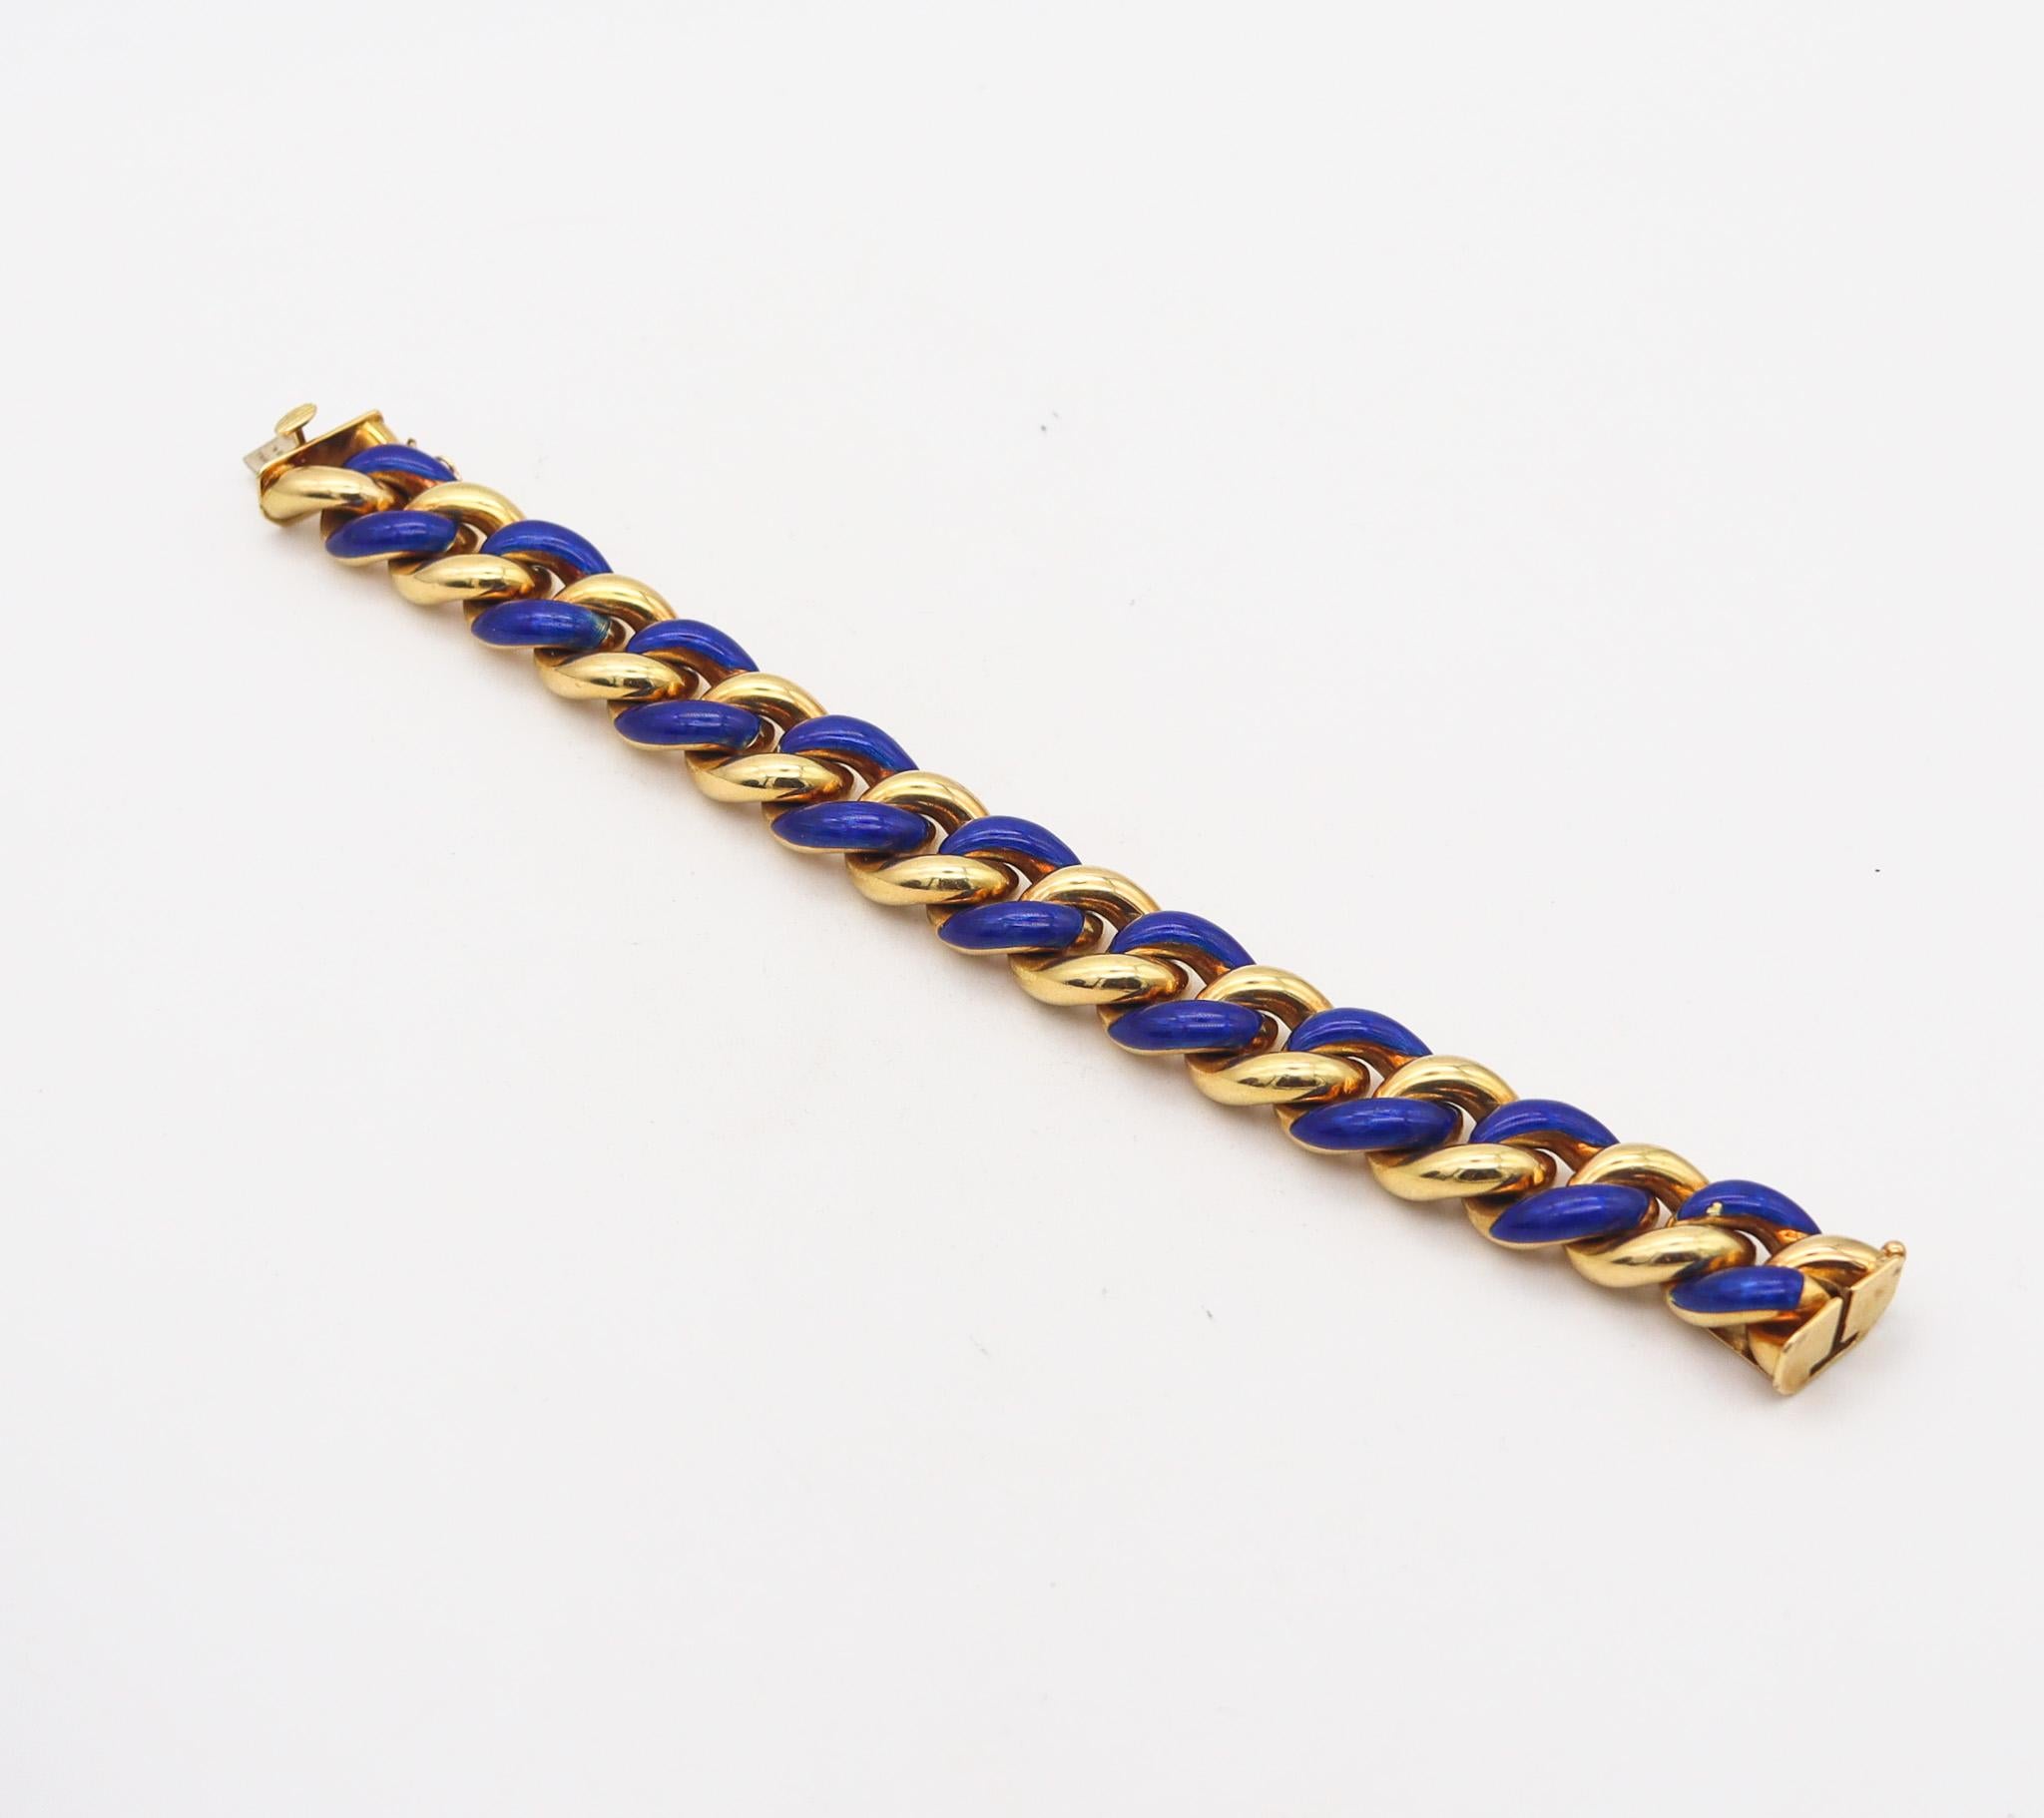 Gay Freres 1970 Paris Blue Enameled Links Bracelet In Solid 18Kt Yellow Gold For Sale 2